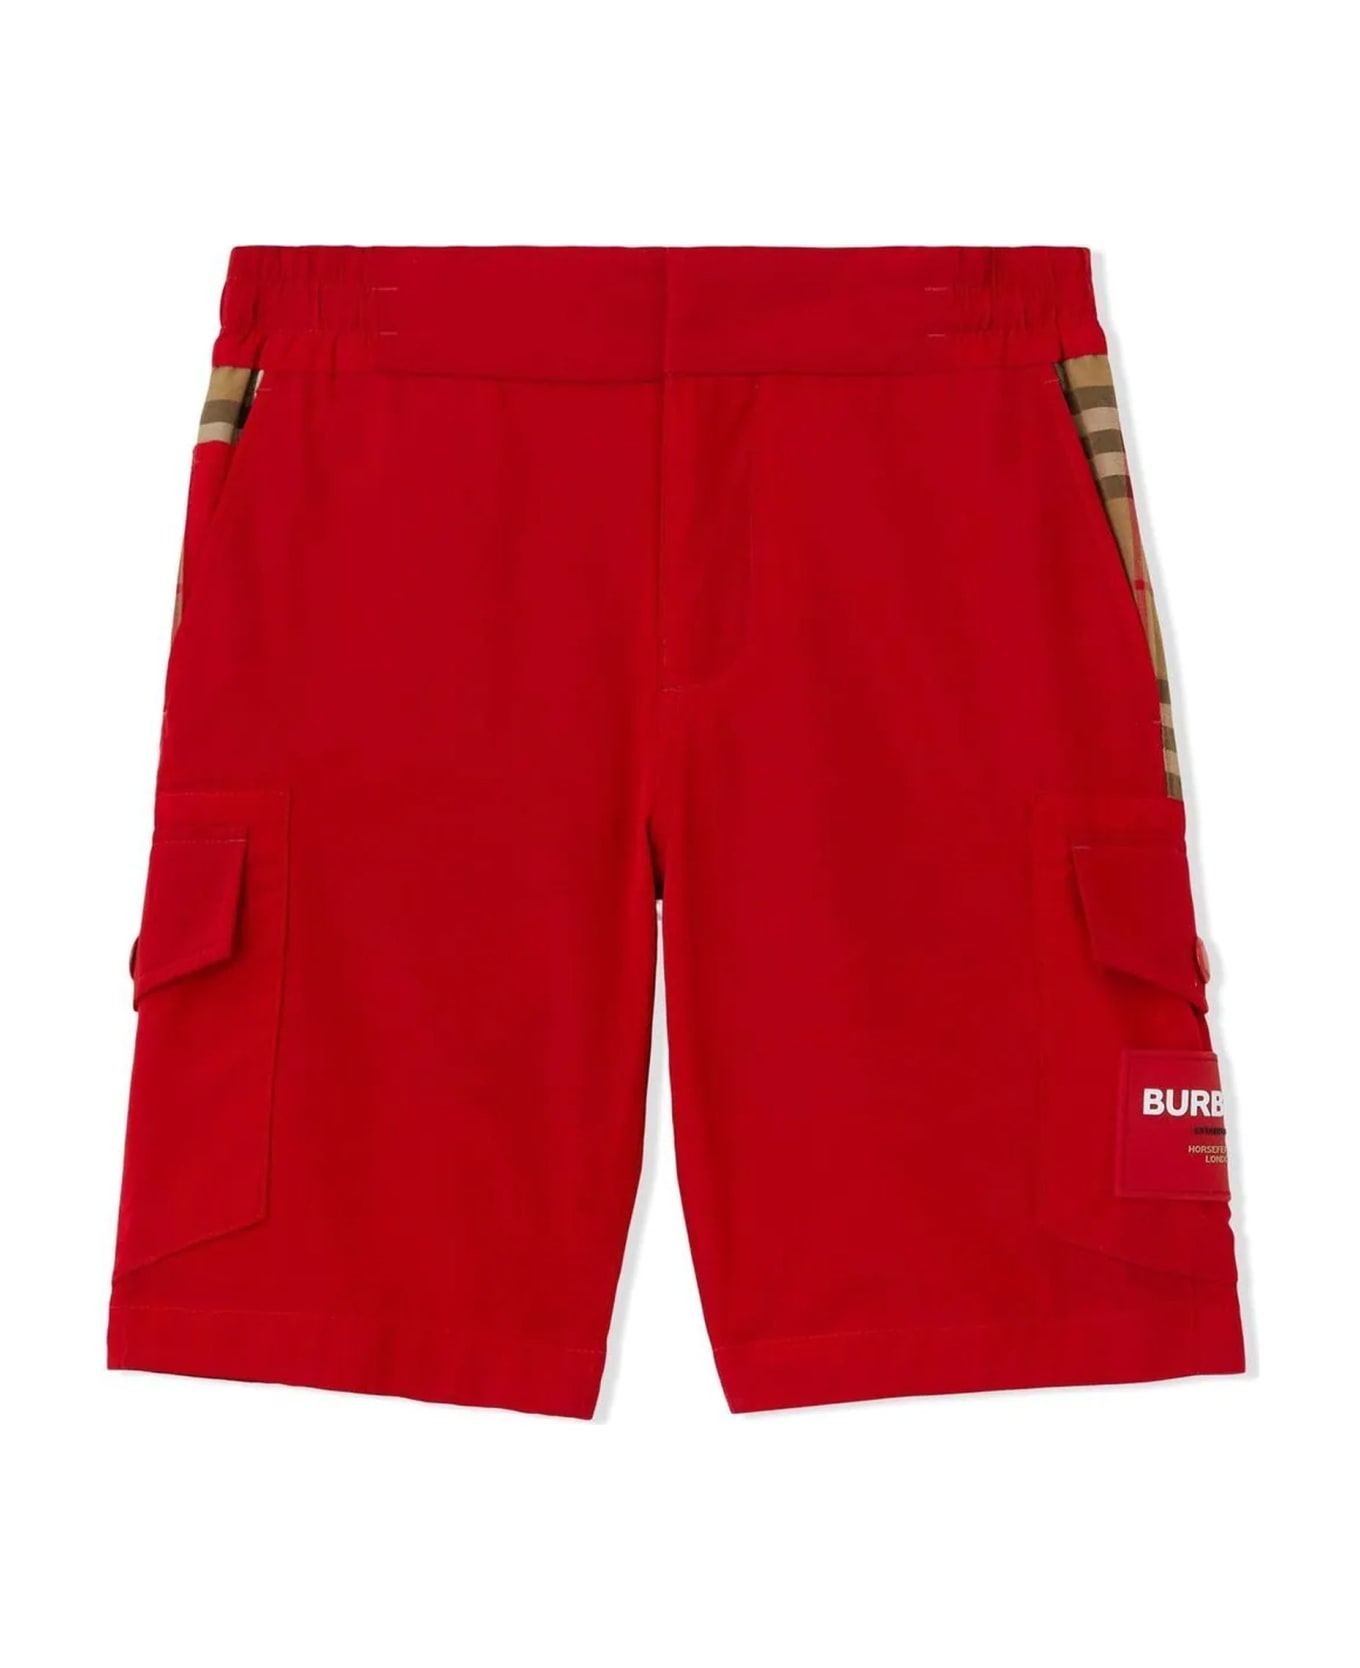 Burberry Kids Shorts Red - Red ボトムス